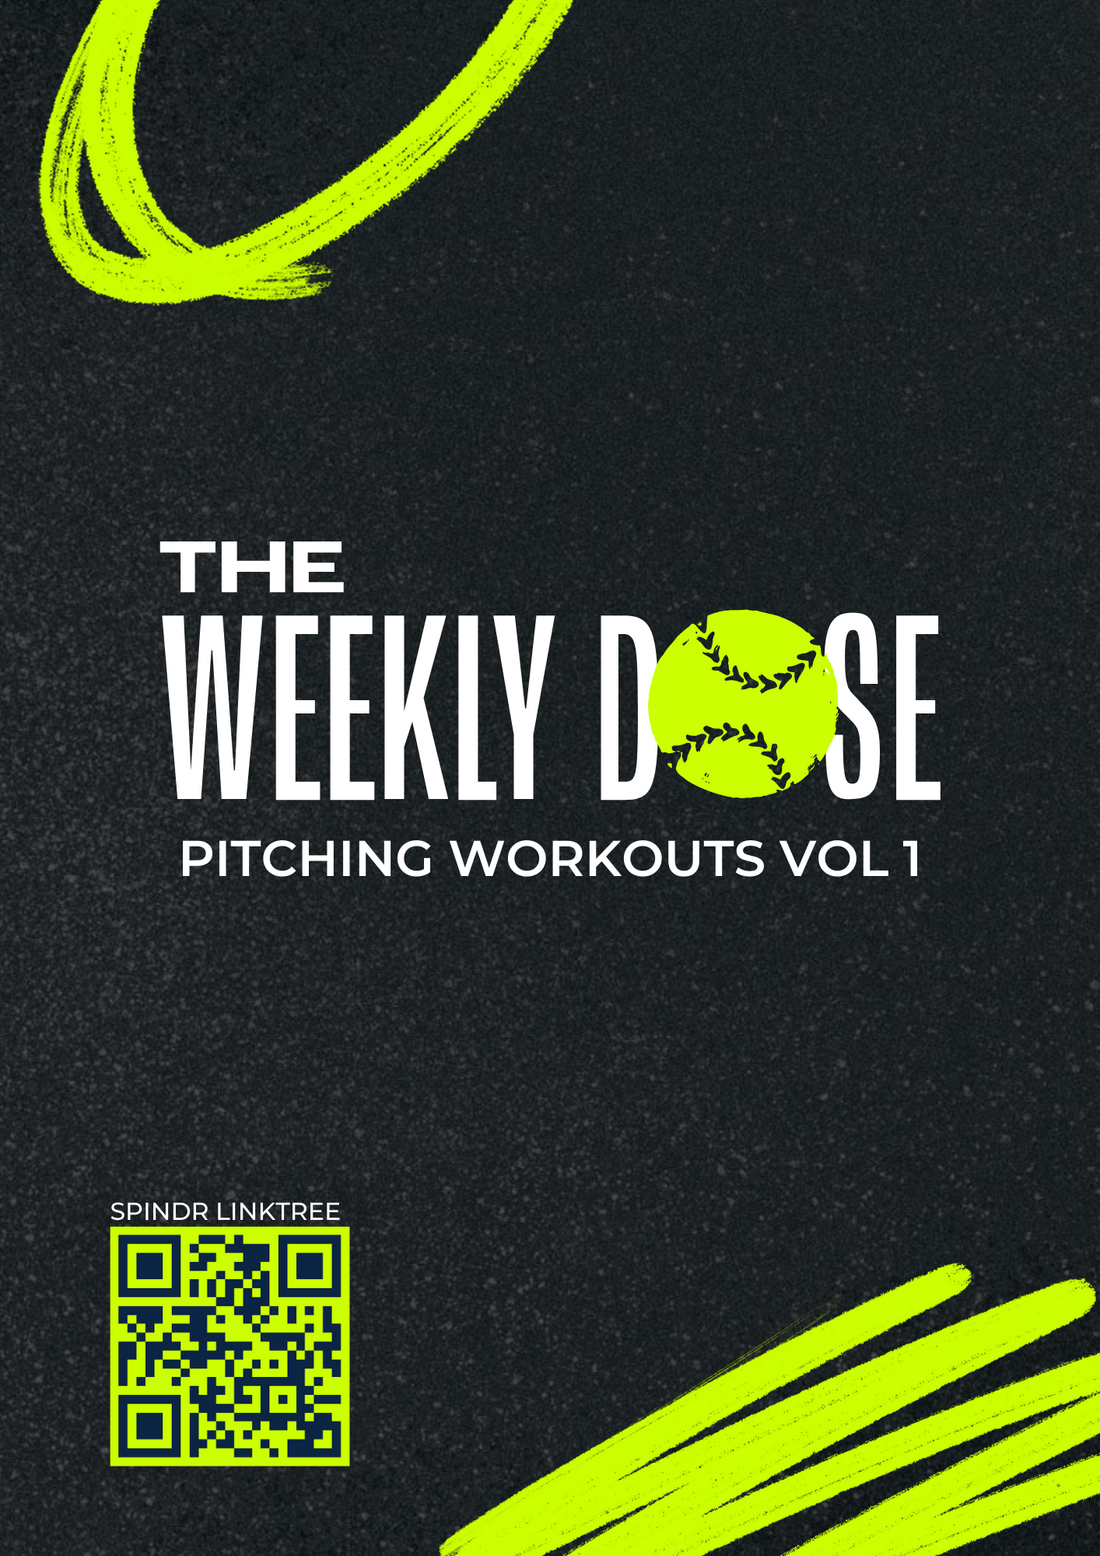 TWD Pitching Workouts Vol 1